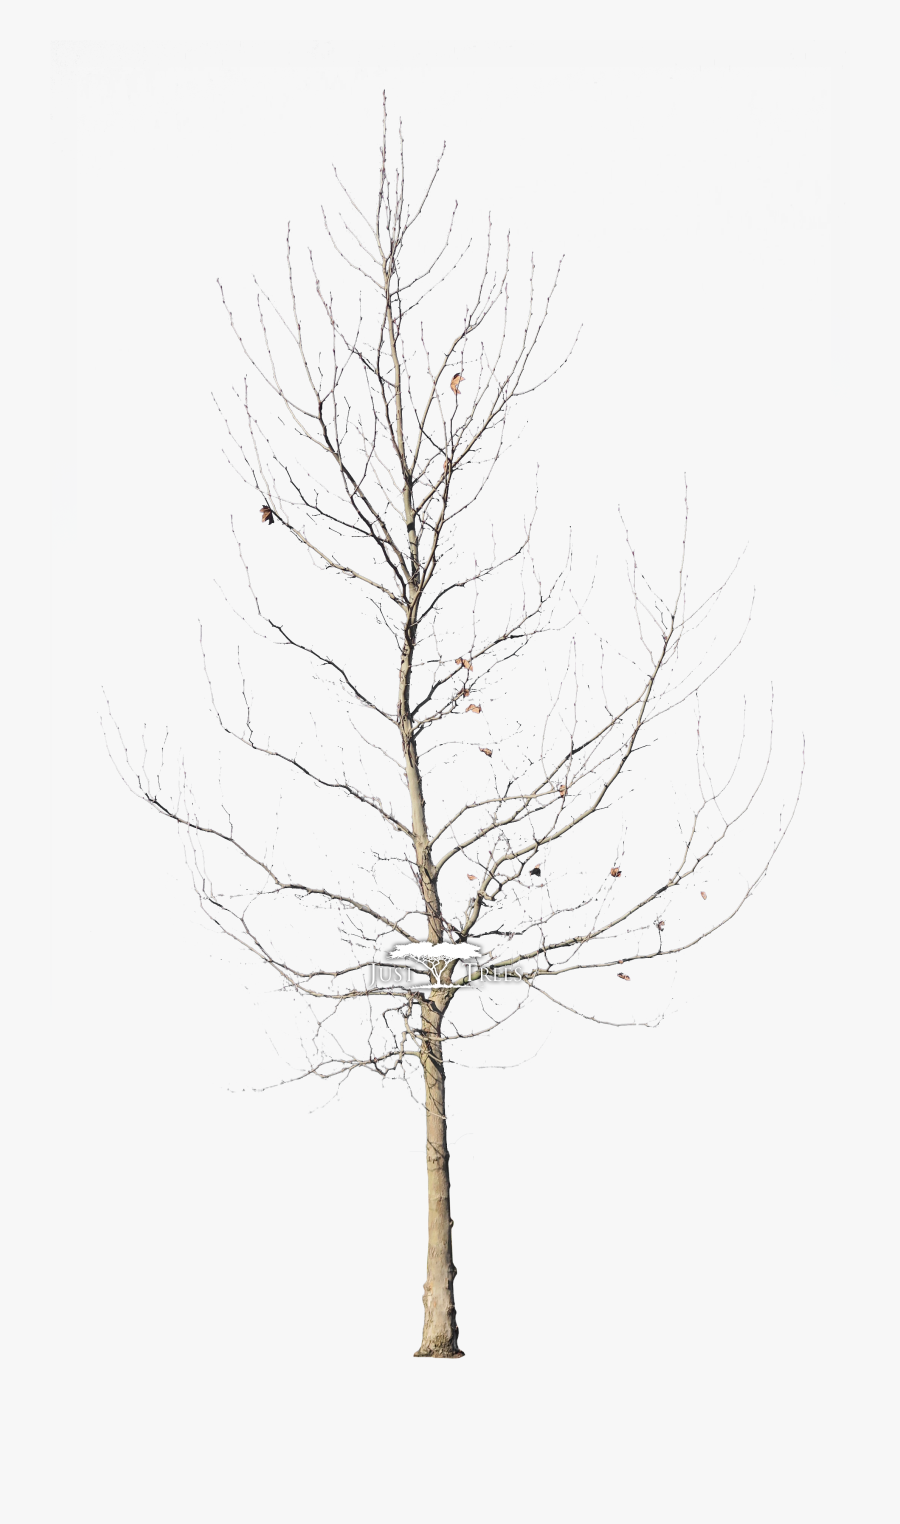 London Plane Tree Winter Png , Free Transparent Clipart - ClipartKey